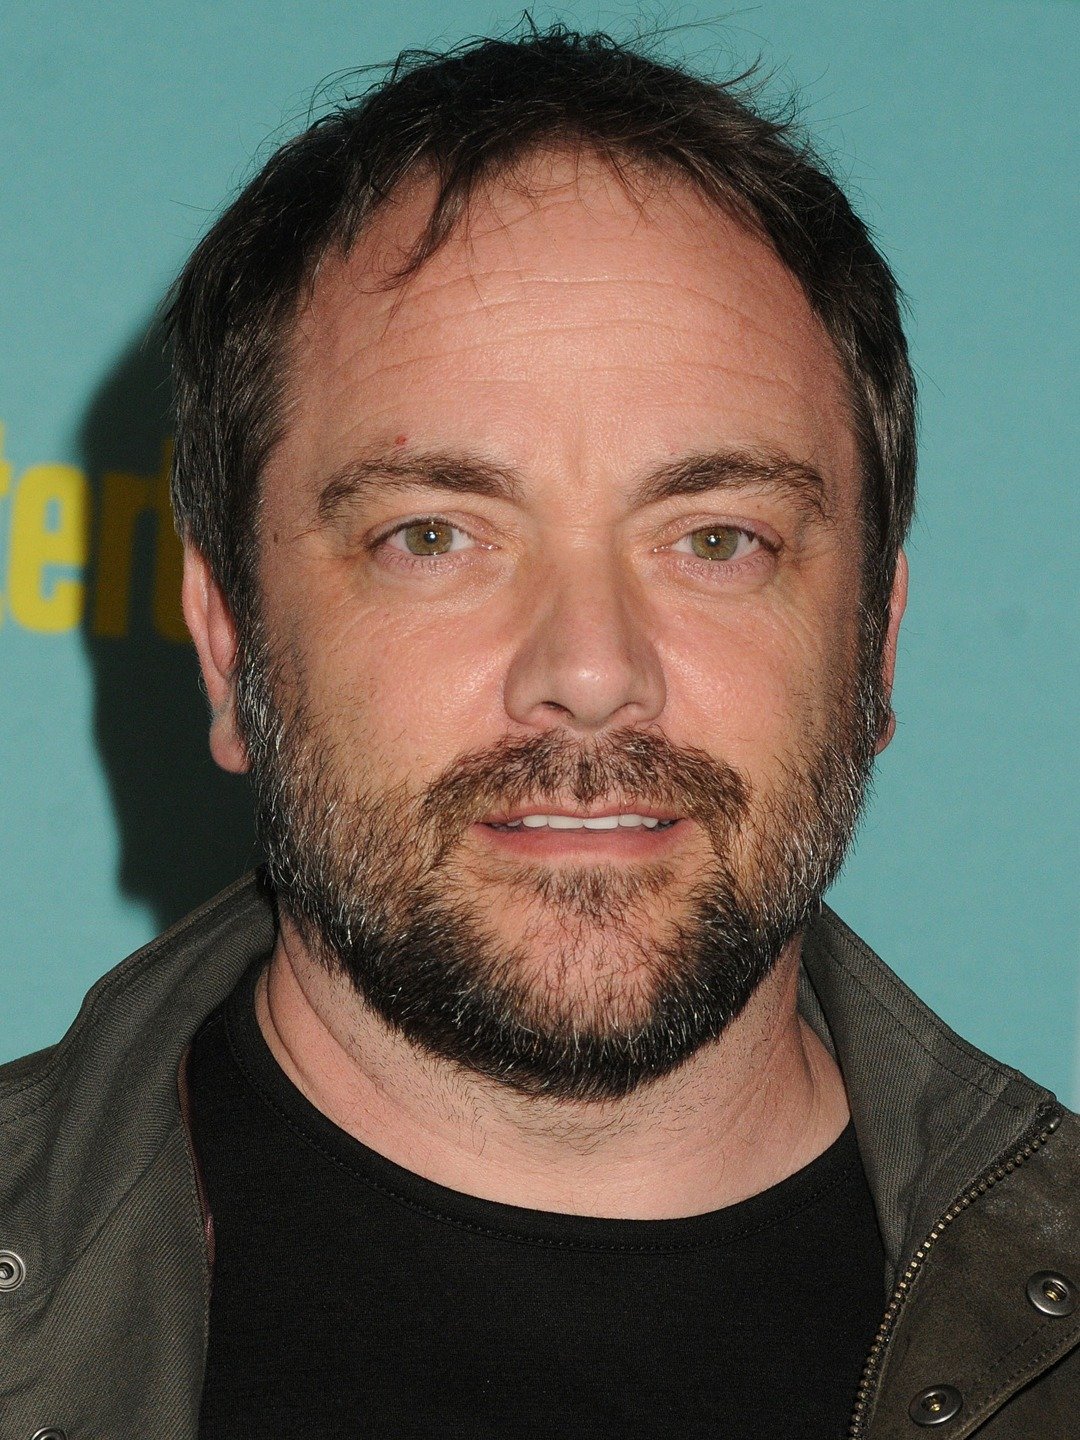 How tall is Mark Sheppard?